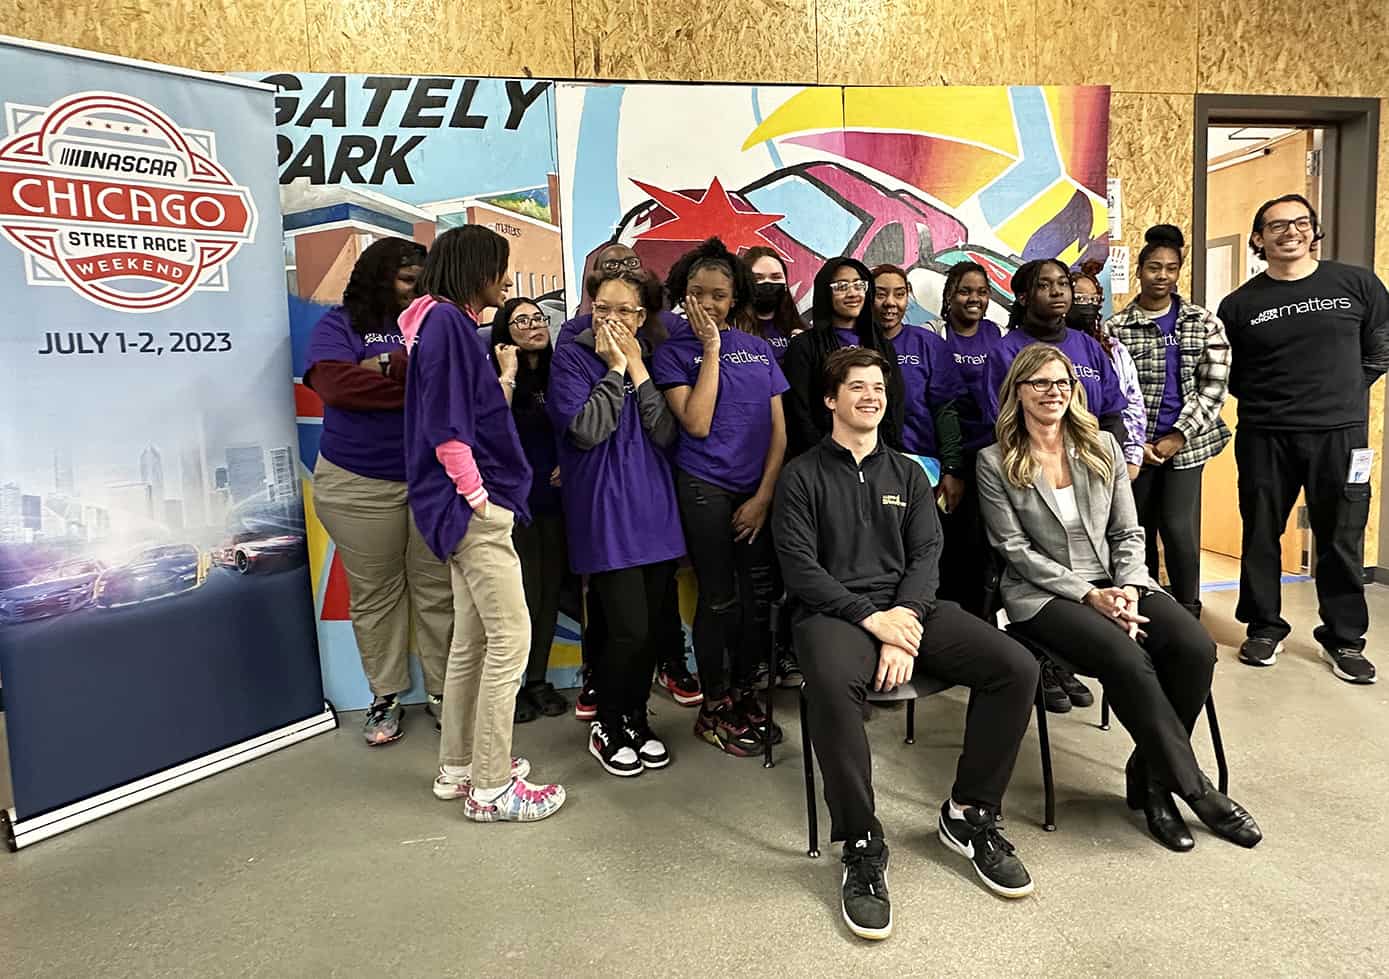 Nascar driver harrison burton and julie giese, pose with student who painted several of the panels that will be featured at the upcoming nascar cup series chicago street race. Photos by jerry jordan/kickin' the tires